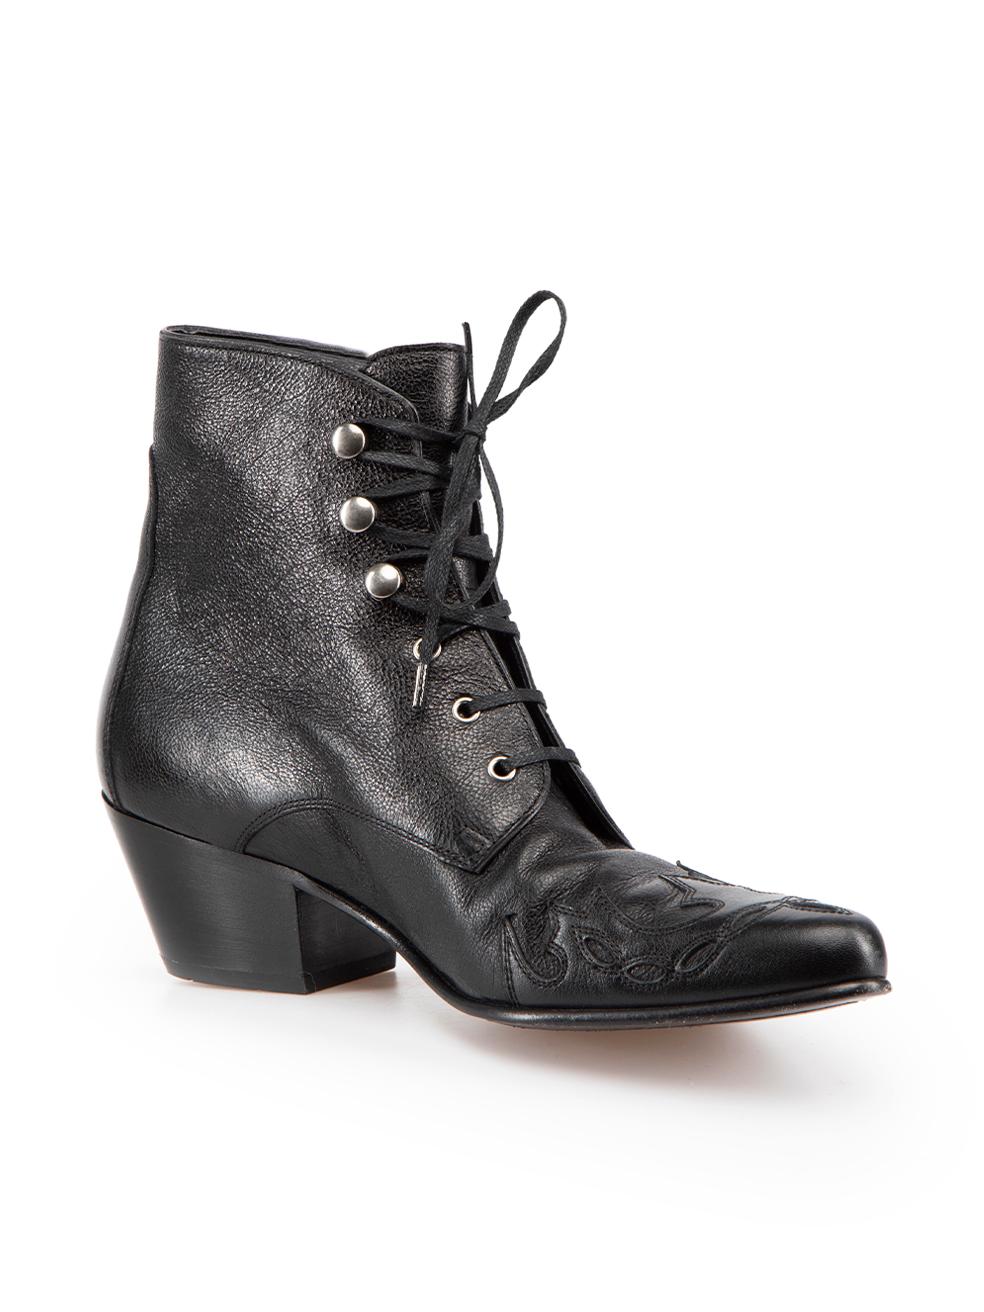 CONDITION is Very good. Minimal wear to boots is evident. Minimal wear to both boot heels and toes with indents to the leather on this used Saint Laurent designer resale item.
 
 Details
 Susan
 Black
 Leather
 Ankle boots
 Point toe
 Mid heel
